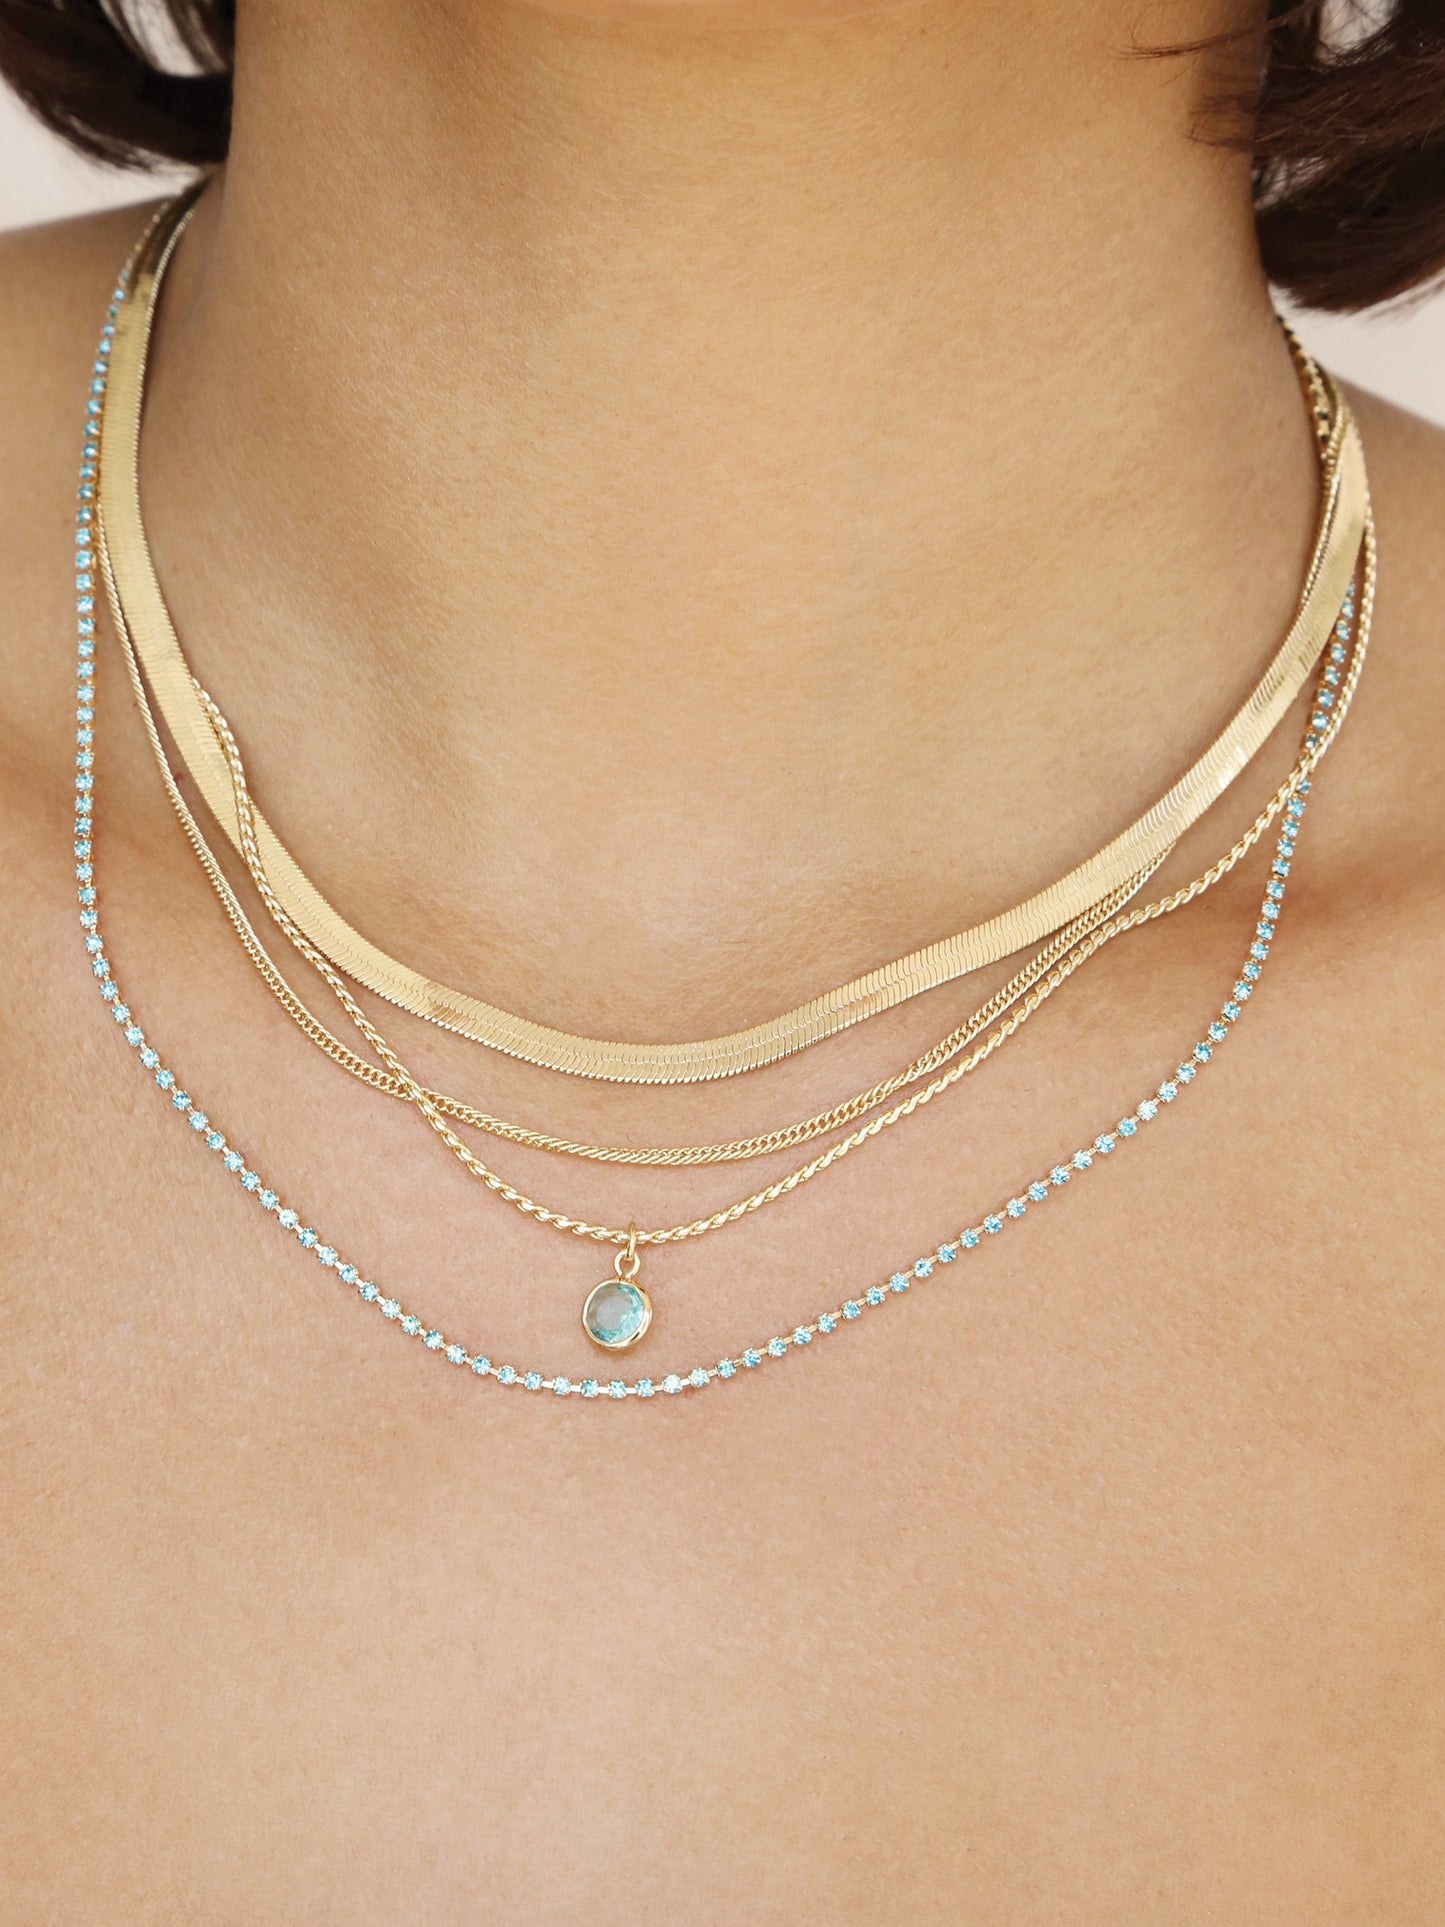 All the Chains Aqua Layered Necklace on model